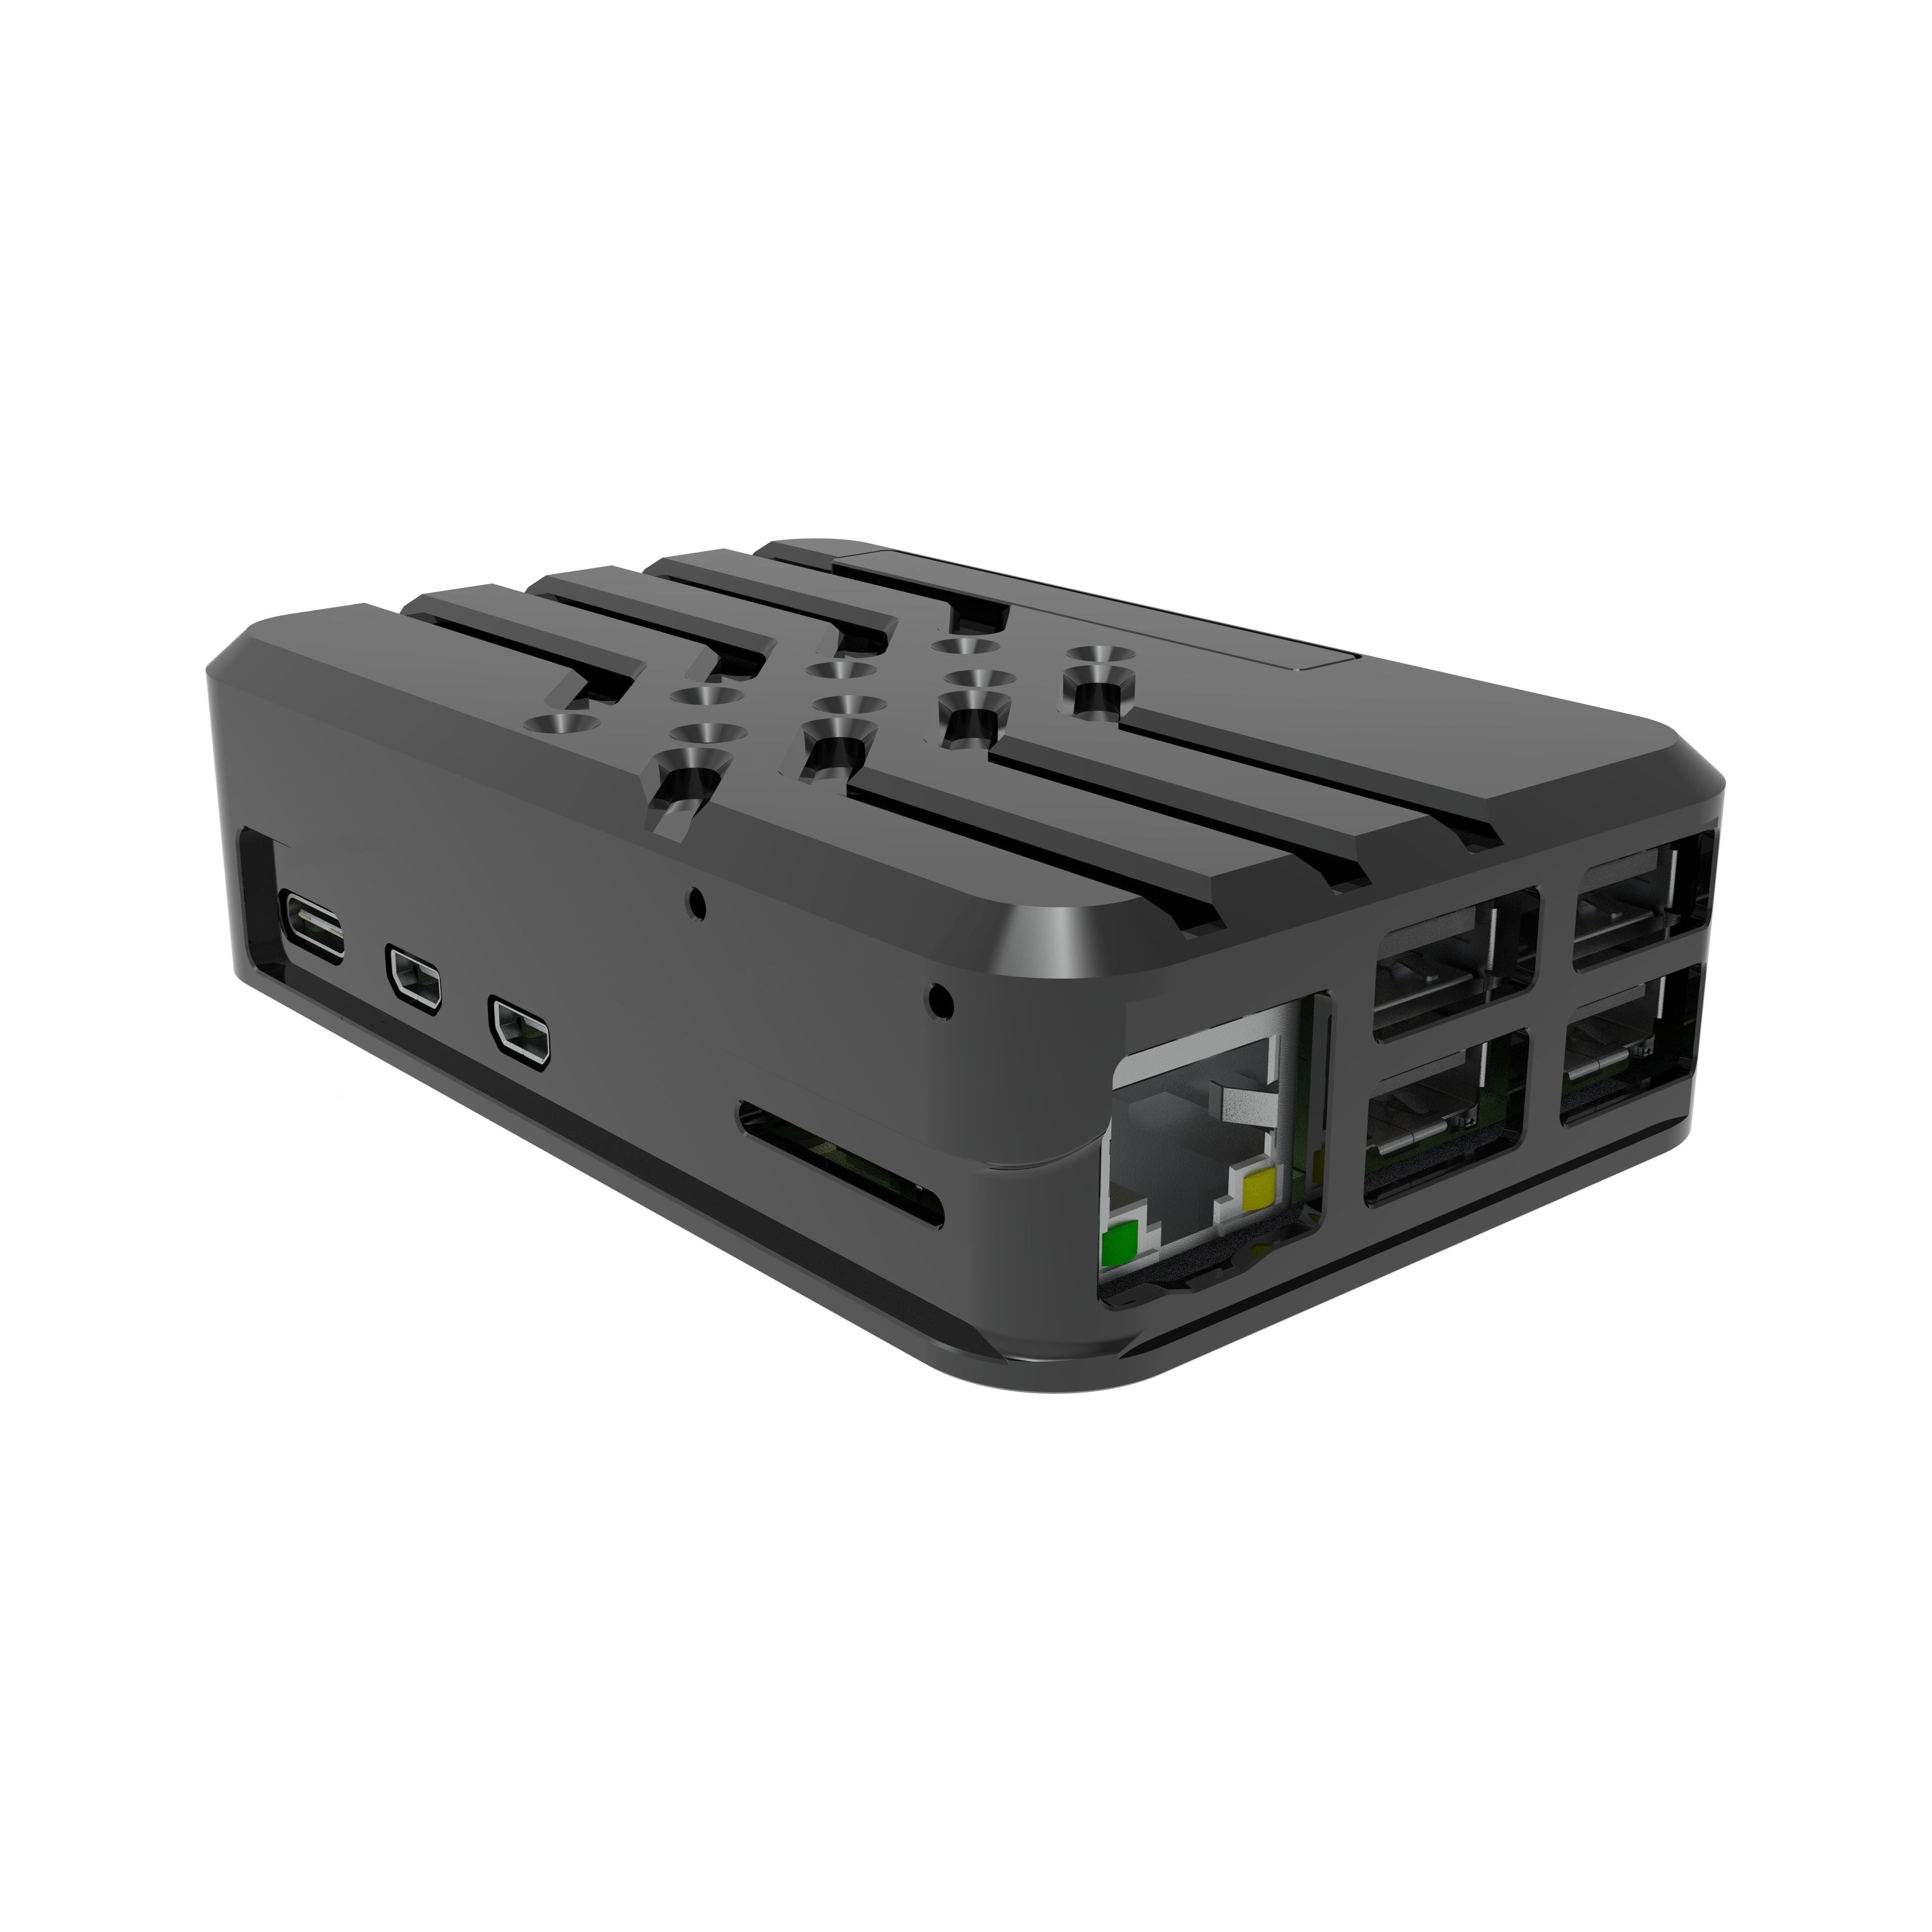 Vilros Duo Deluxe Raspberry Pi 5 Case- The Deluxe Passive and Active  Cooling Case for Pi 5